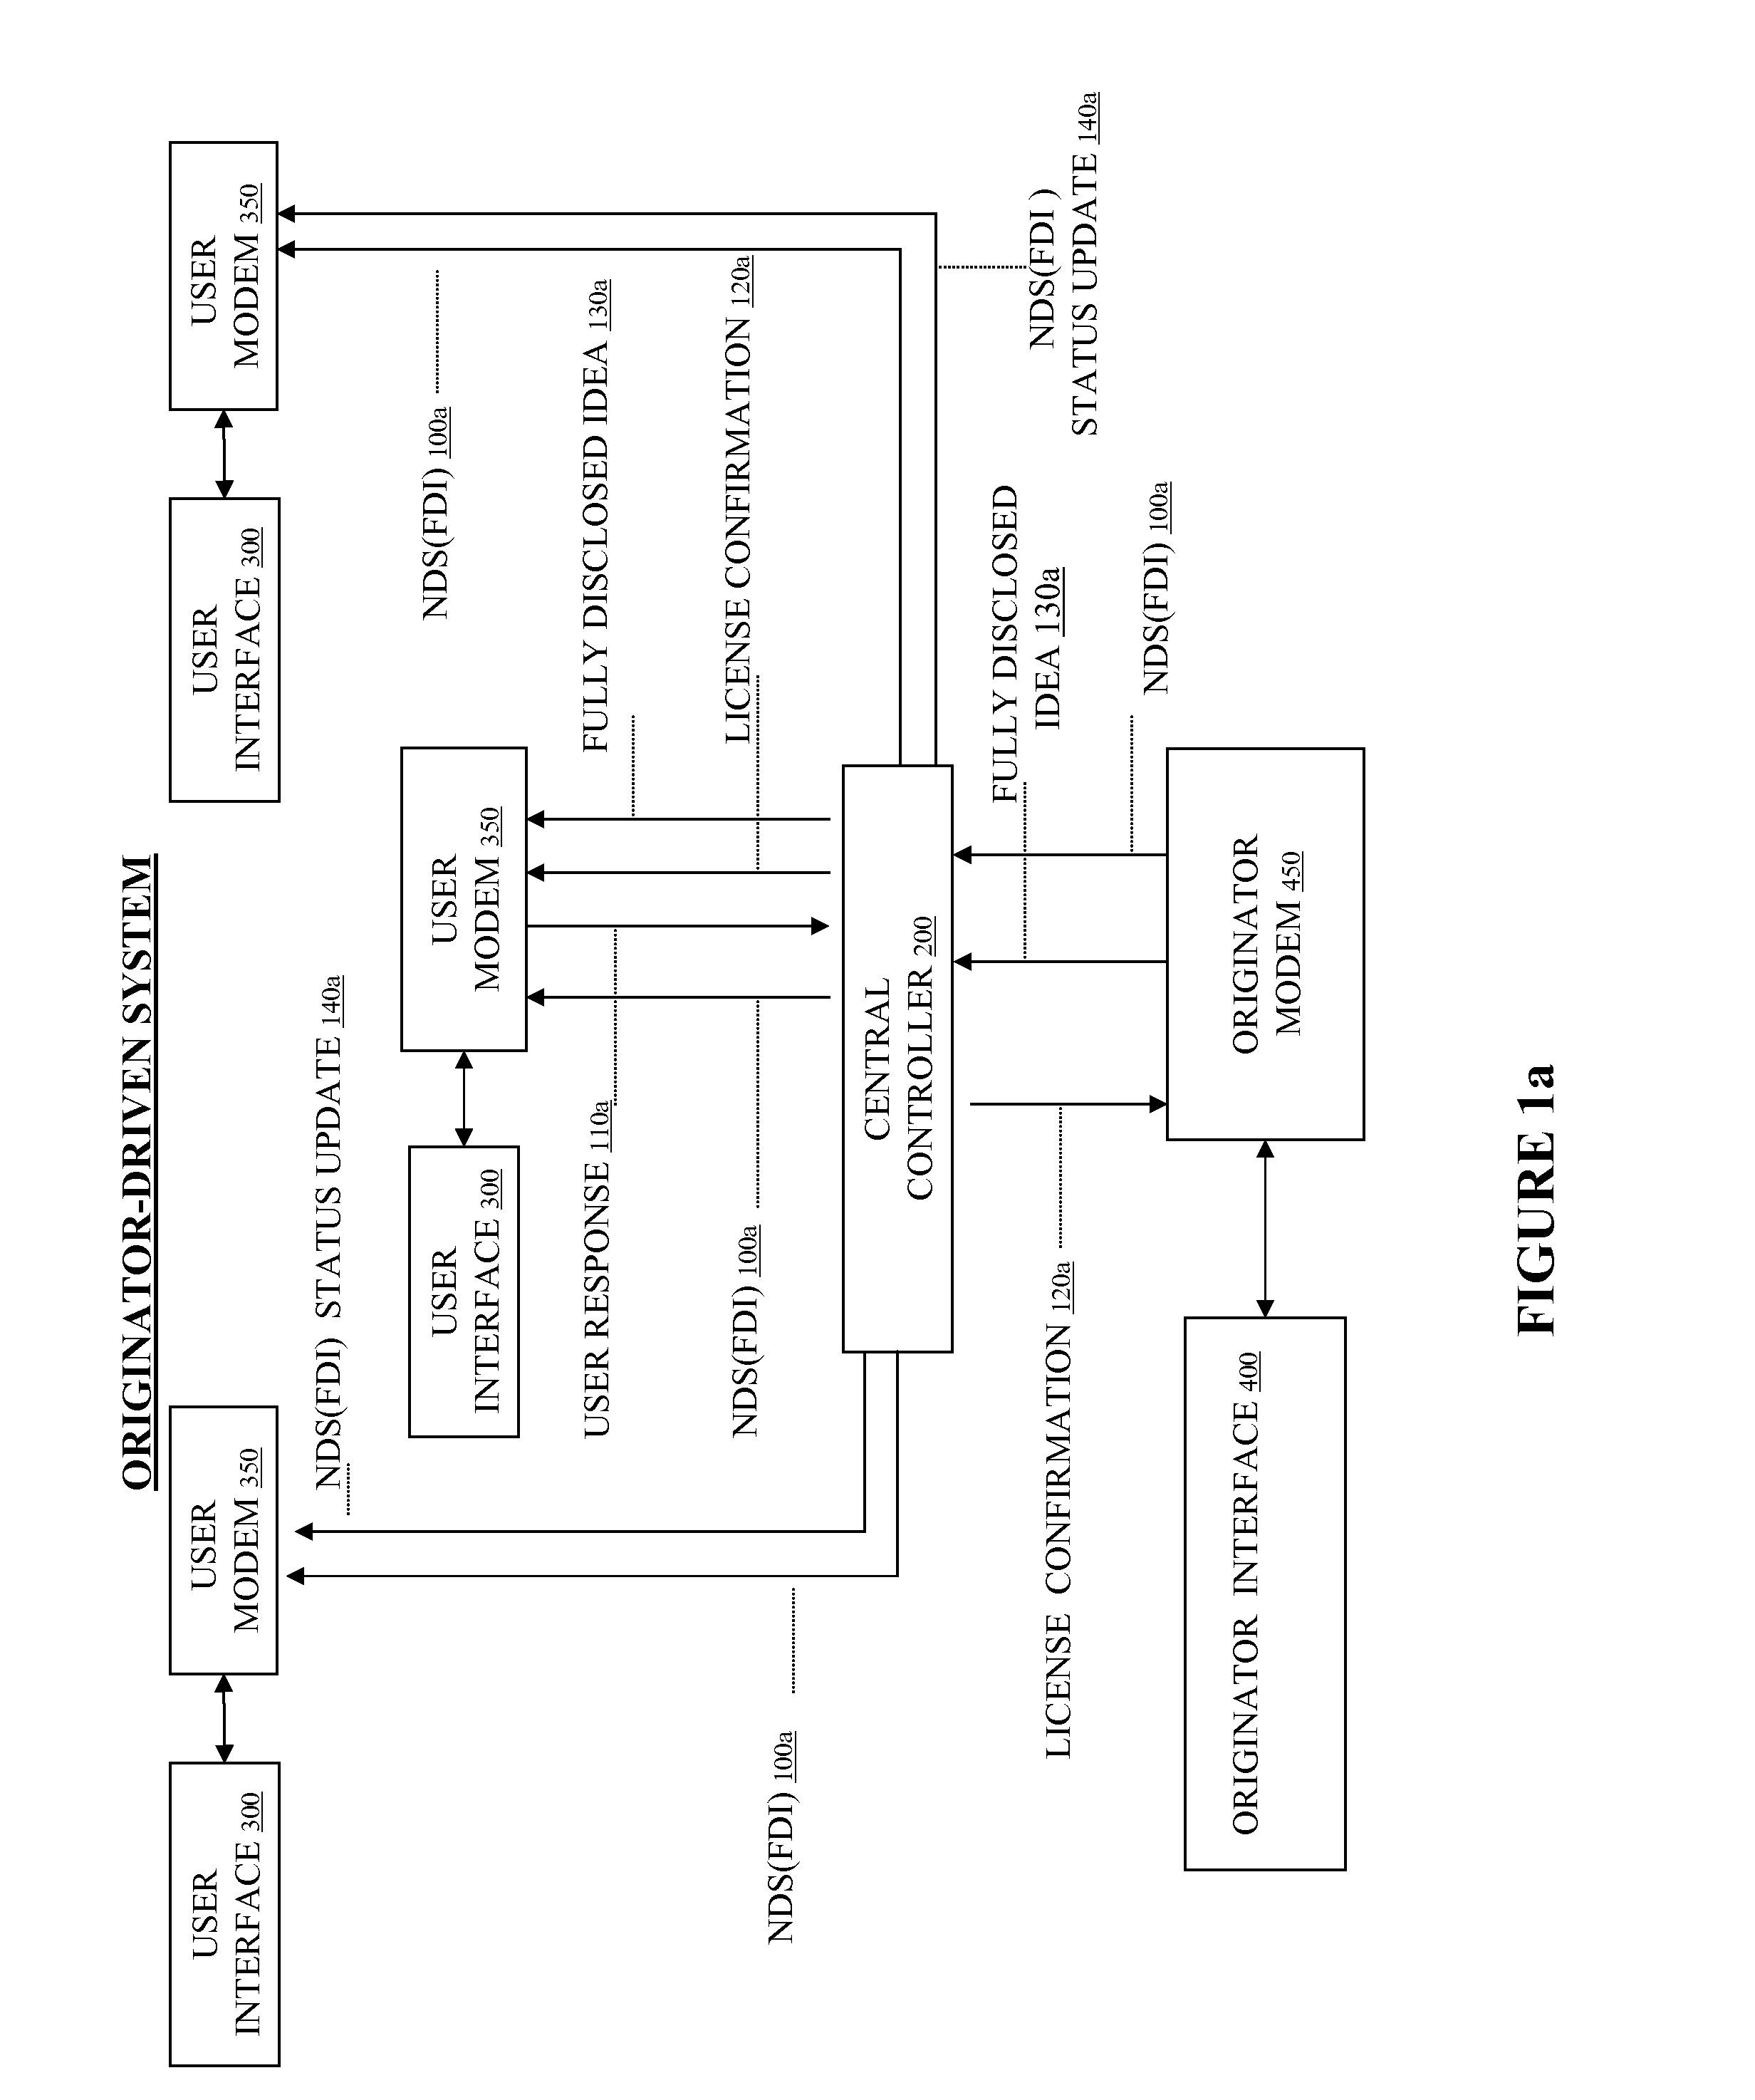 System and Method to Facilitate and Support Electronic Communication of Request for Proposals